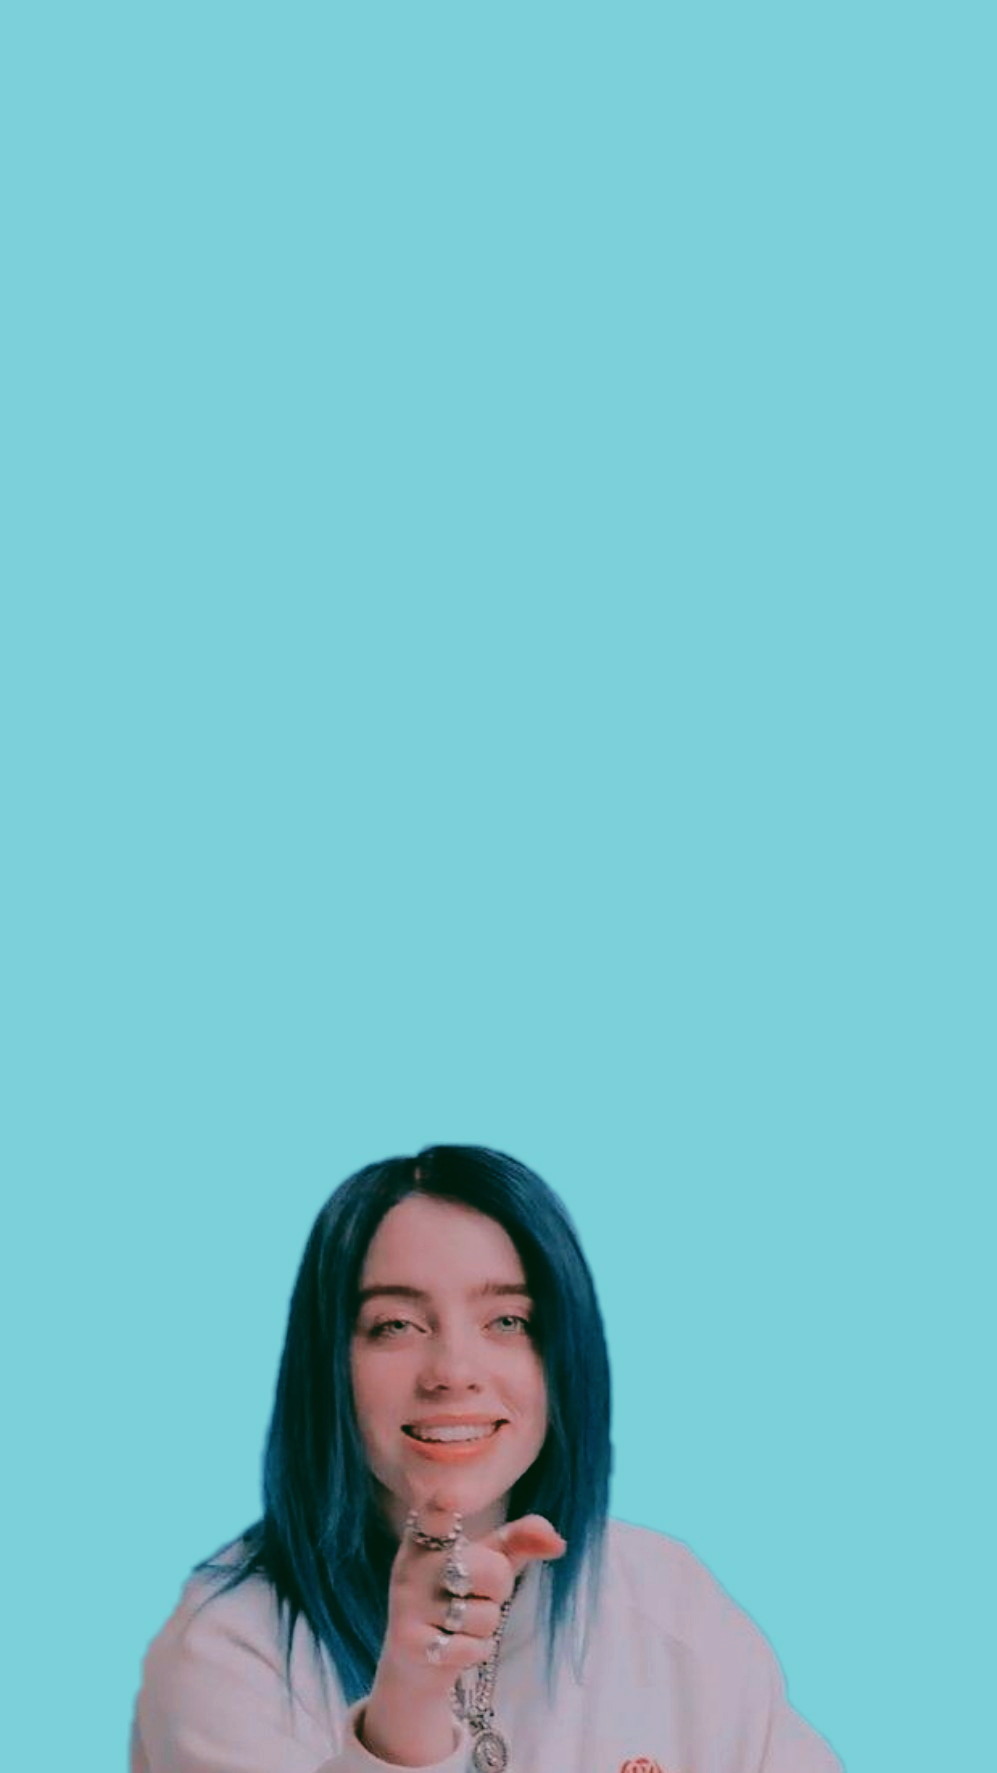 multifandons edits — billie eilish wallpapers; all made by me